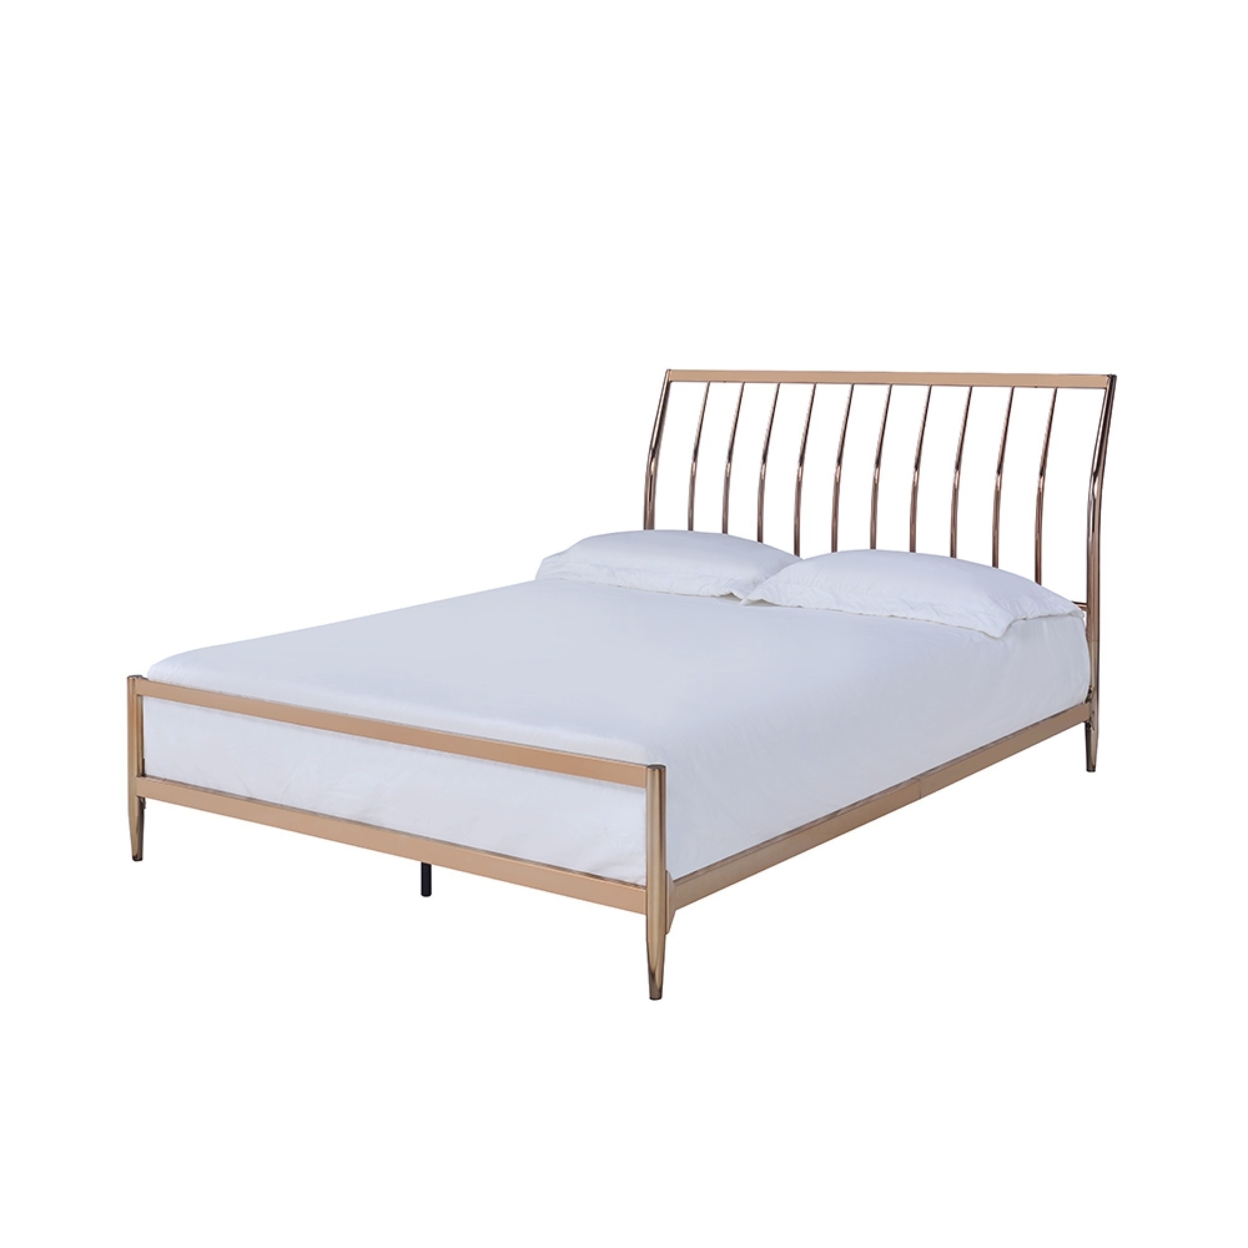 Industrial Metal Queen Bed With Tapered Legs And Slated Headboard, Copper- Saltoro Sherpi